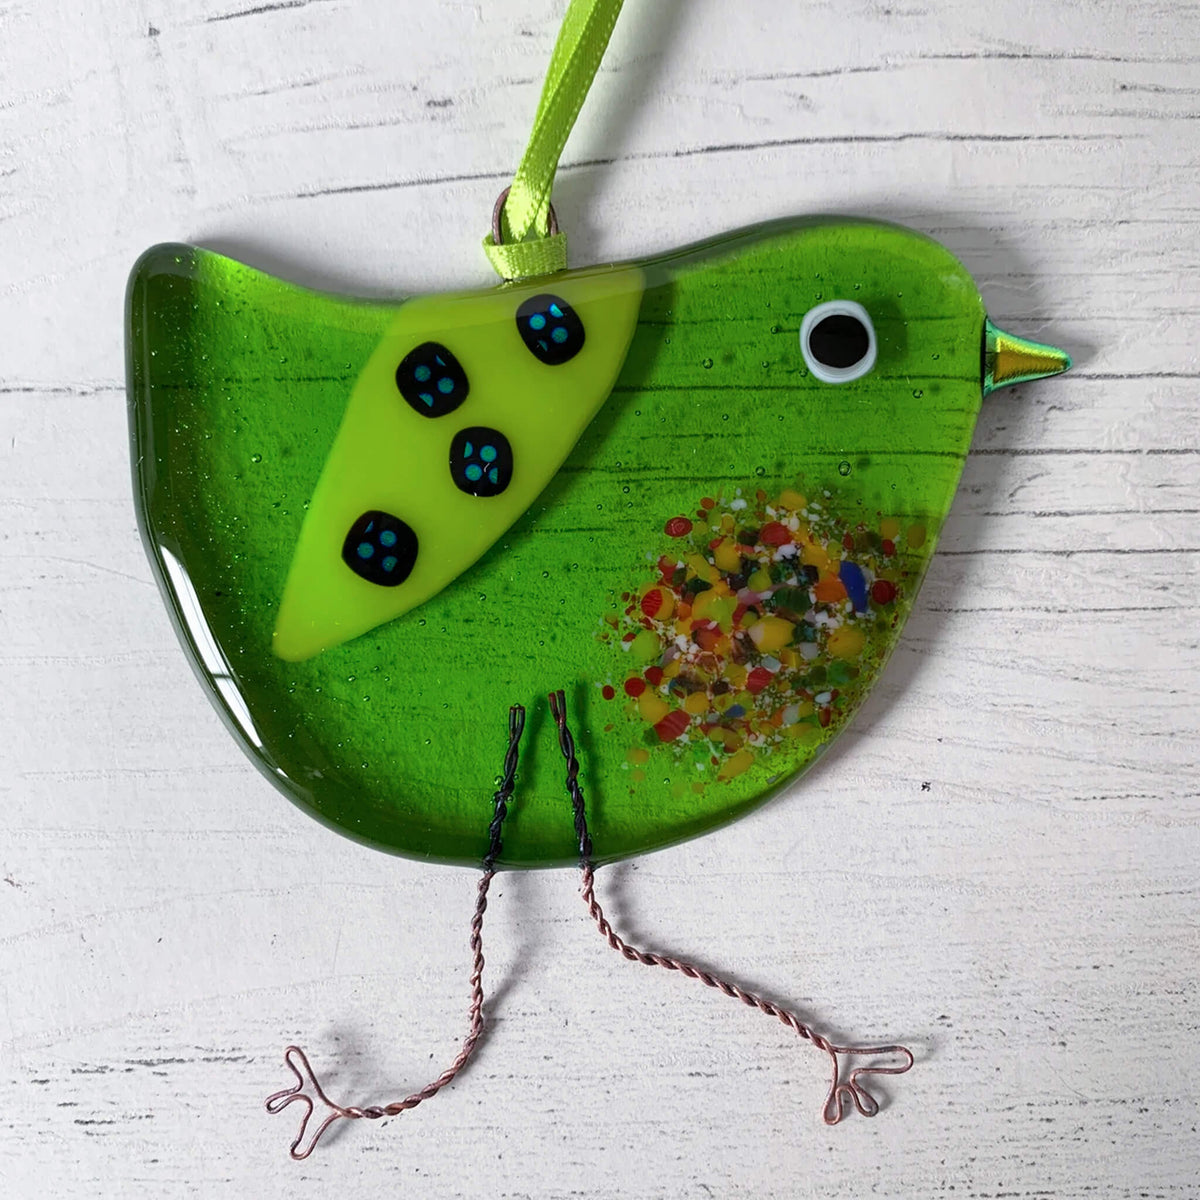 Handmade Fused Glass Green Hanging Bird, on a silky green ribbon. Featuring a multicoloured textured belly, wire legs, an eye and patterned wing. By Sarah Myatt in Staffordshire.